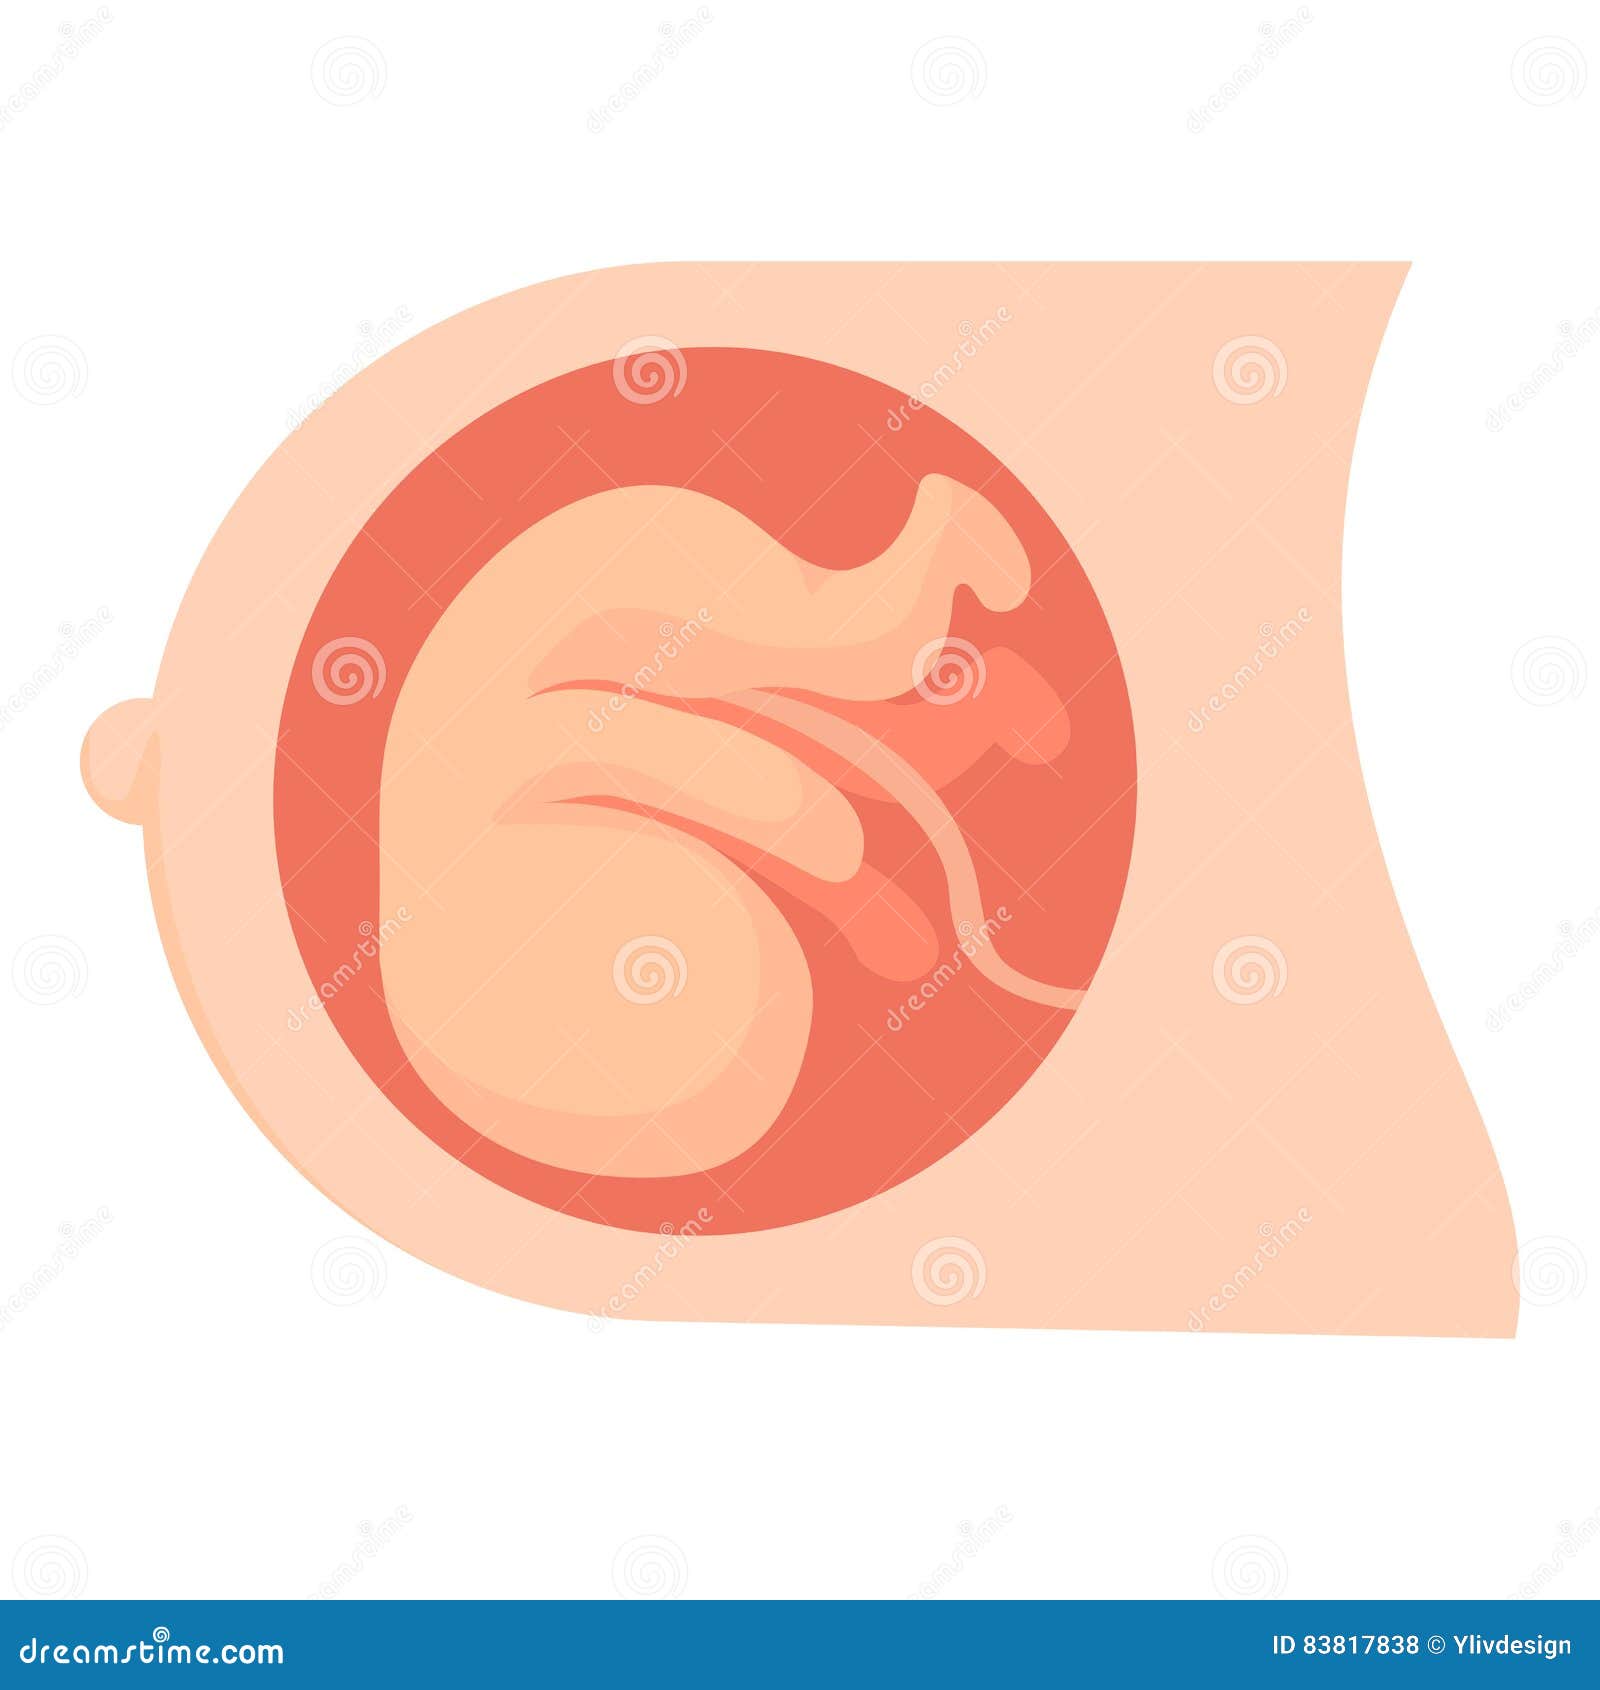 free clipart baby in womb - photo #16